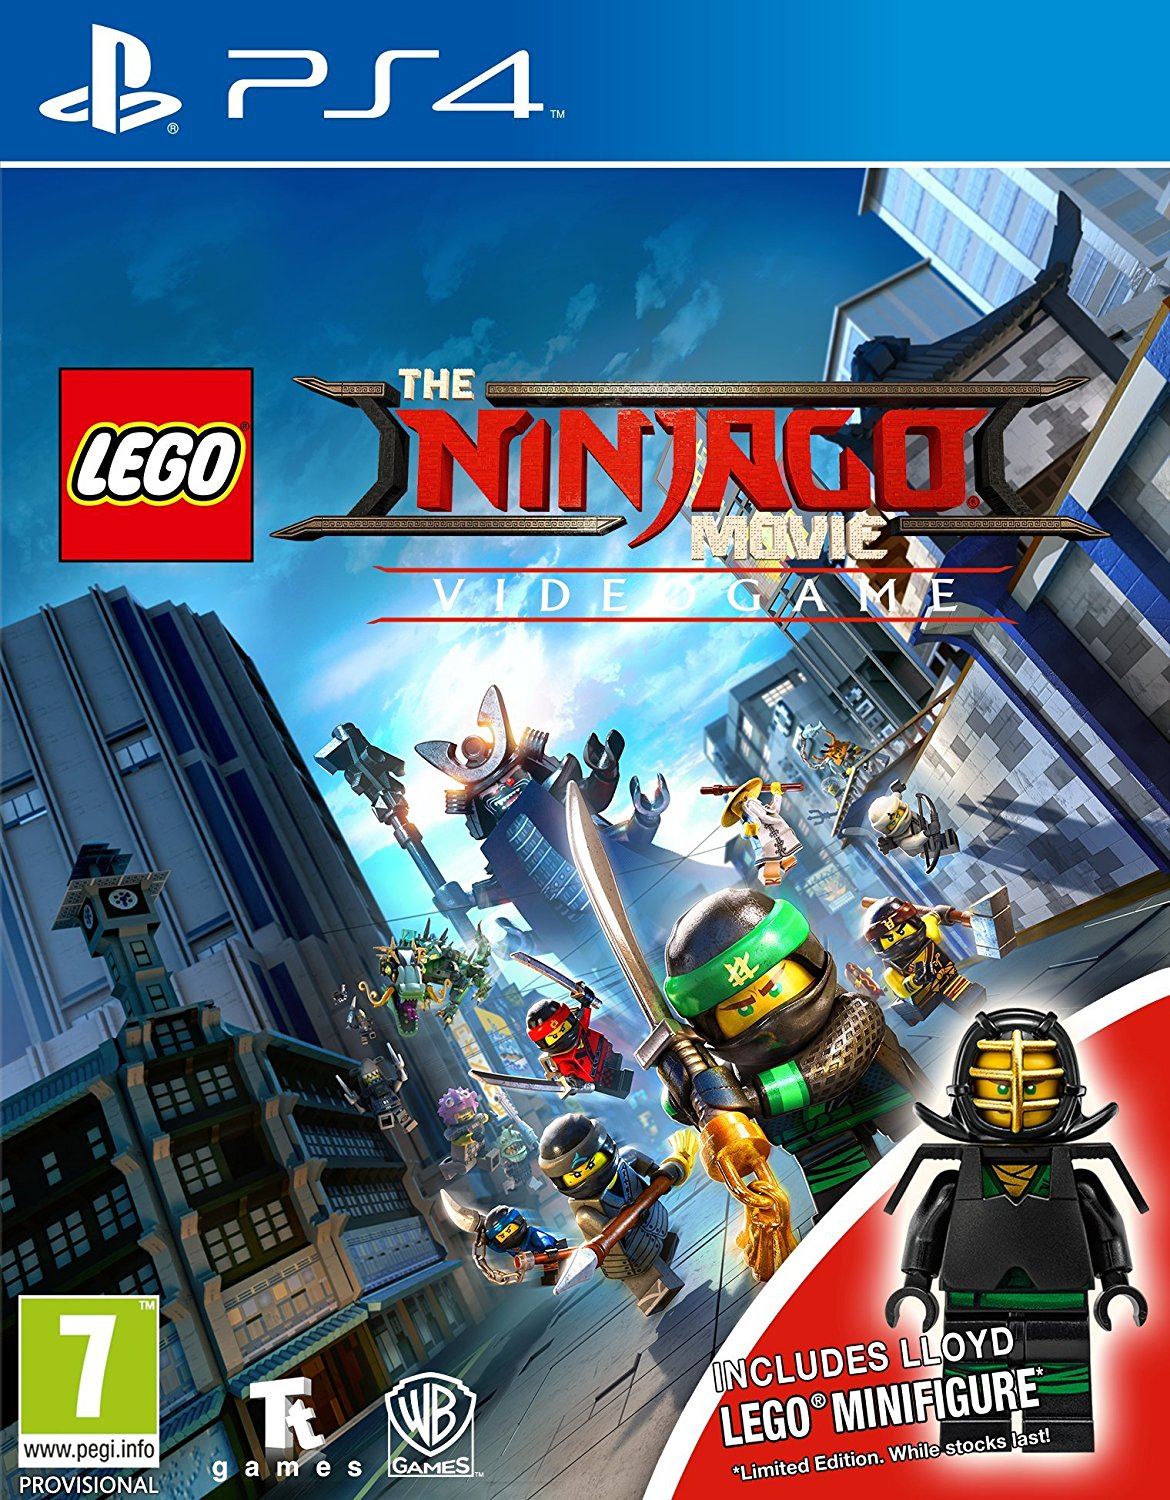 Tænke bagagerum Alice The LEGO NINJAGO Movie Video Game [Mini-Fig Edition] for PlayStation 4